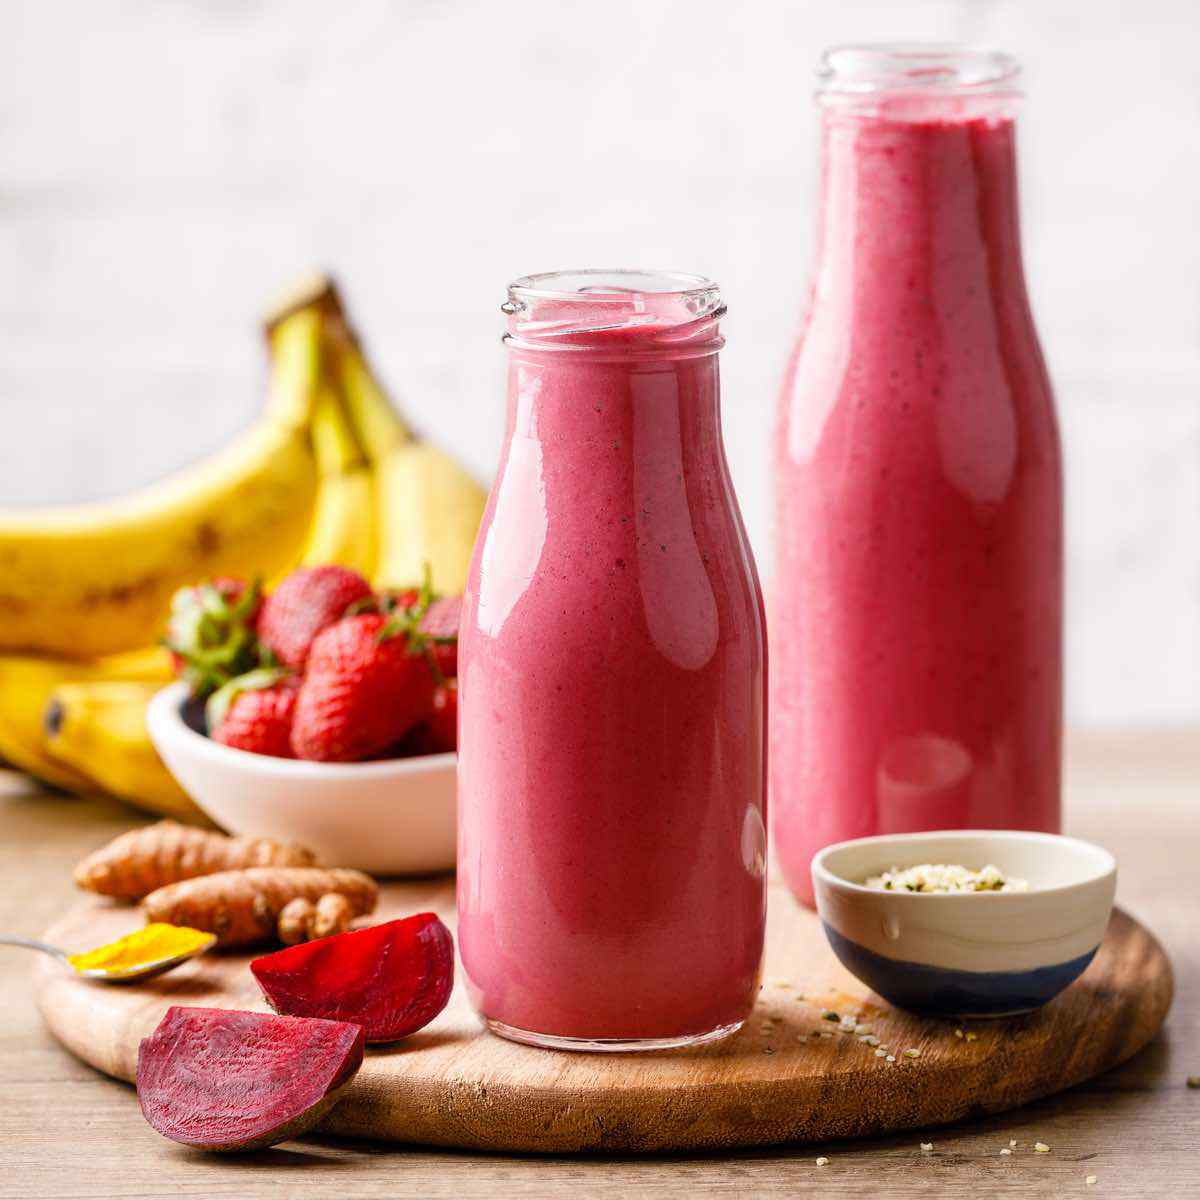 Healthy Strawberry Banana Smoothie Recipes For Weight Loss